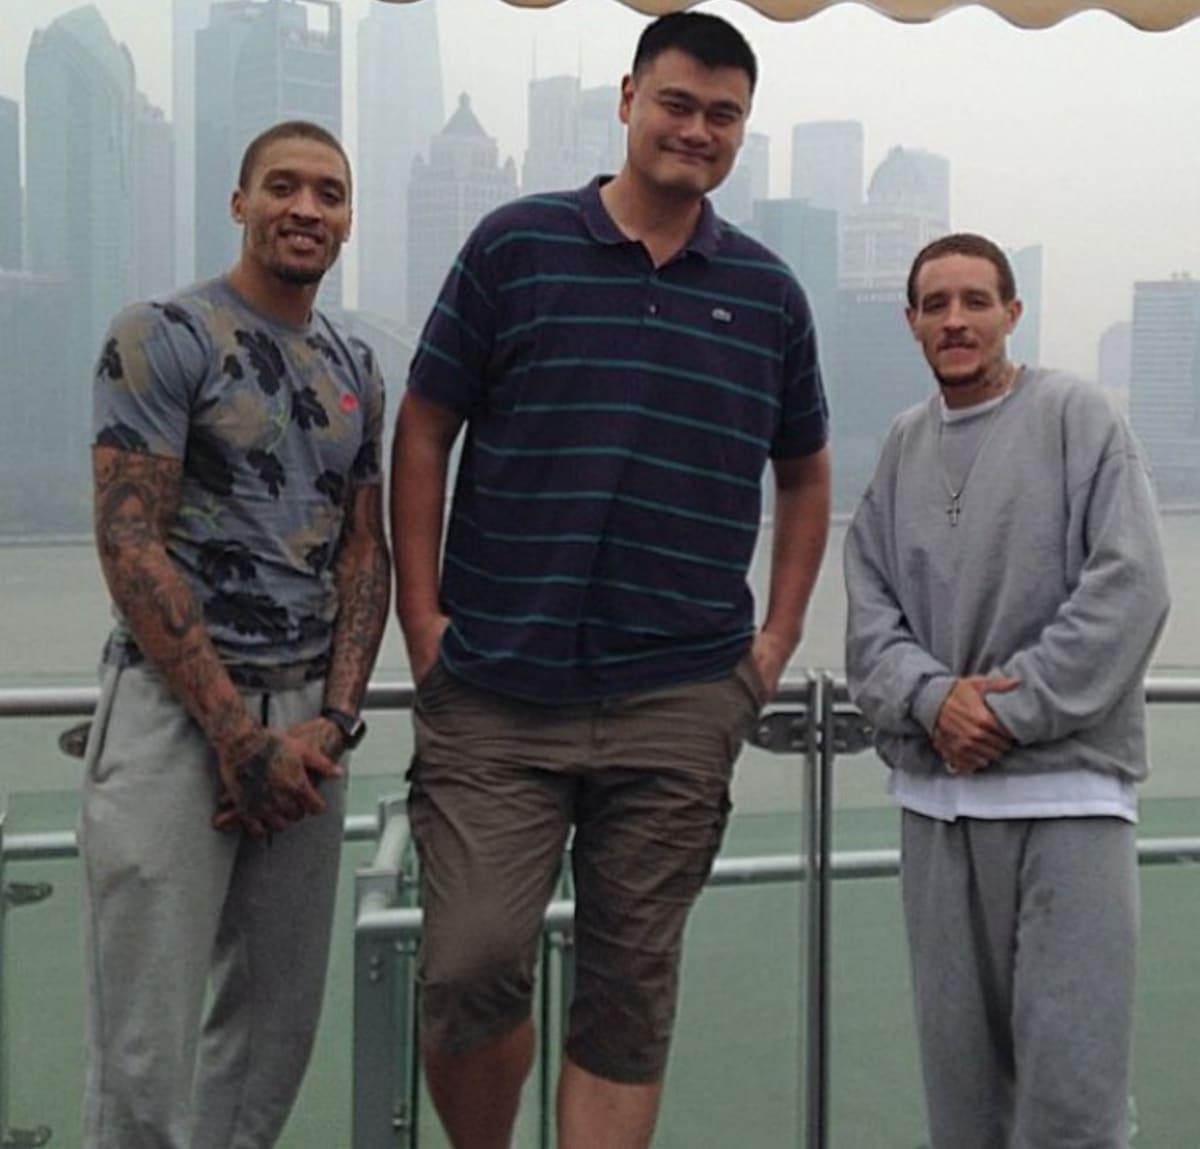 Michael Beasley, Yao Ming, and Delonte West Chilling in China | Complex